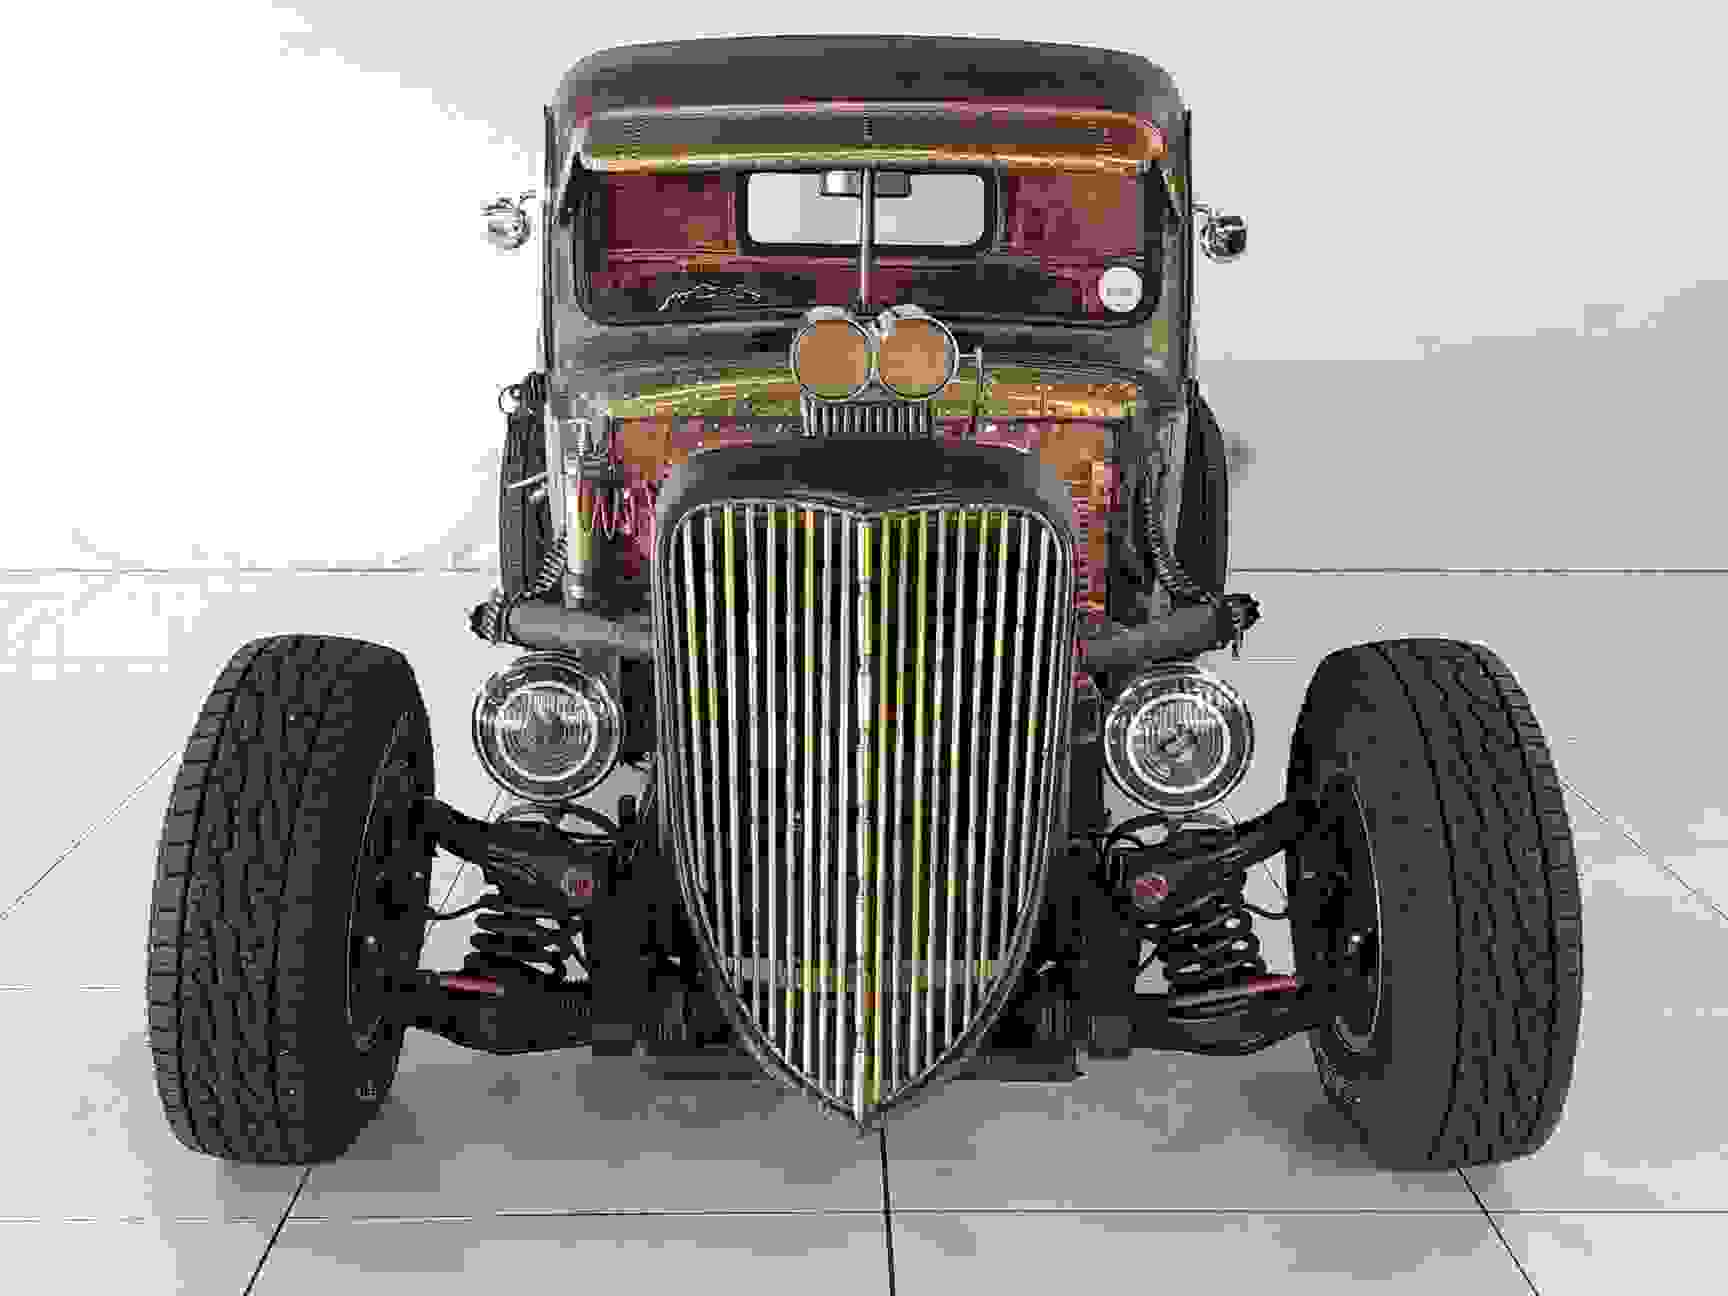 Rat Rods - The Enduring Fad